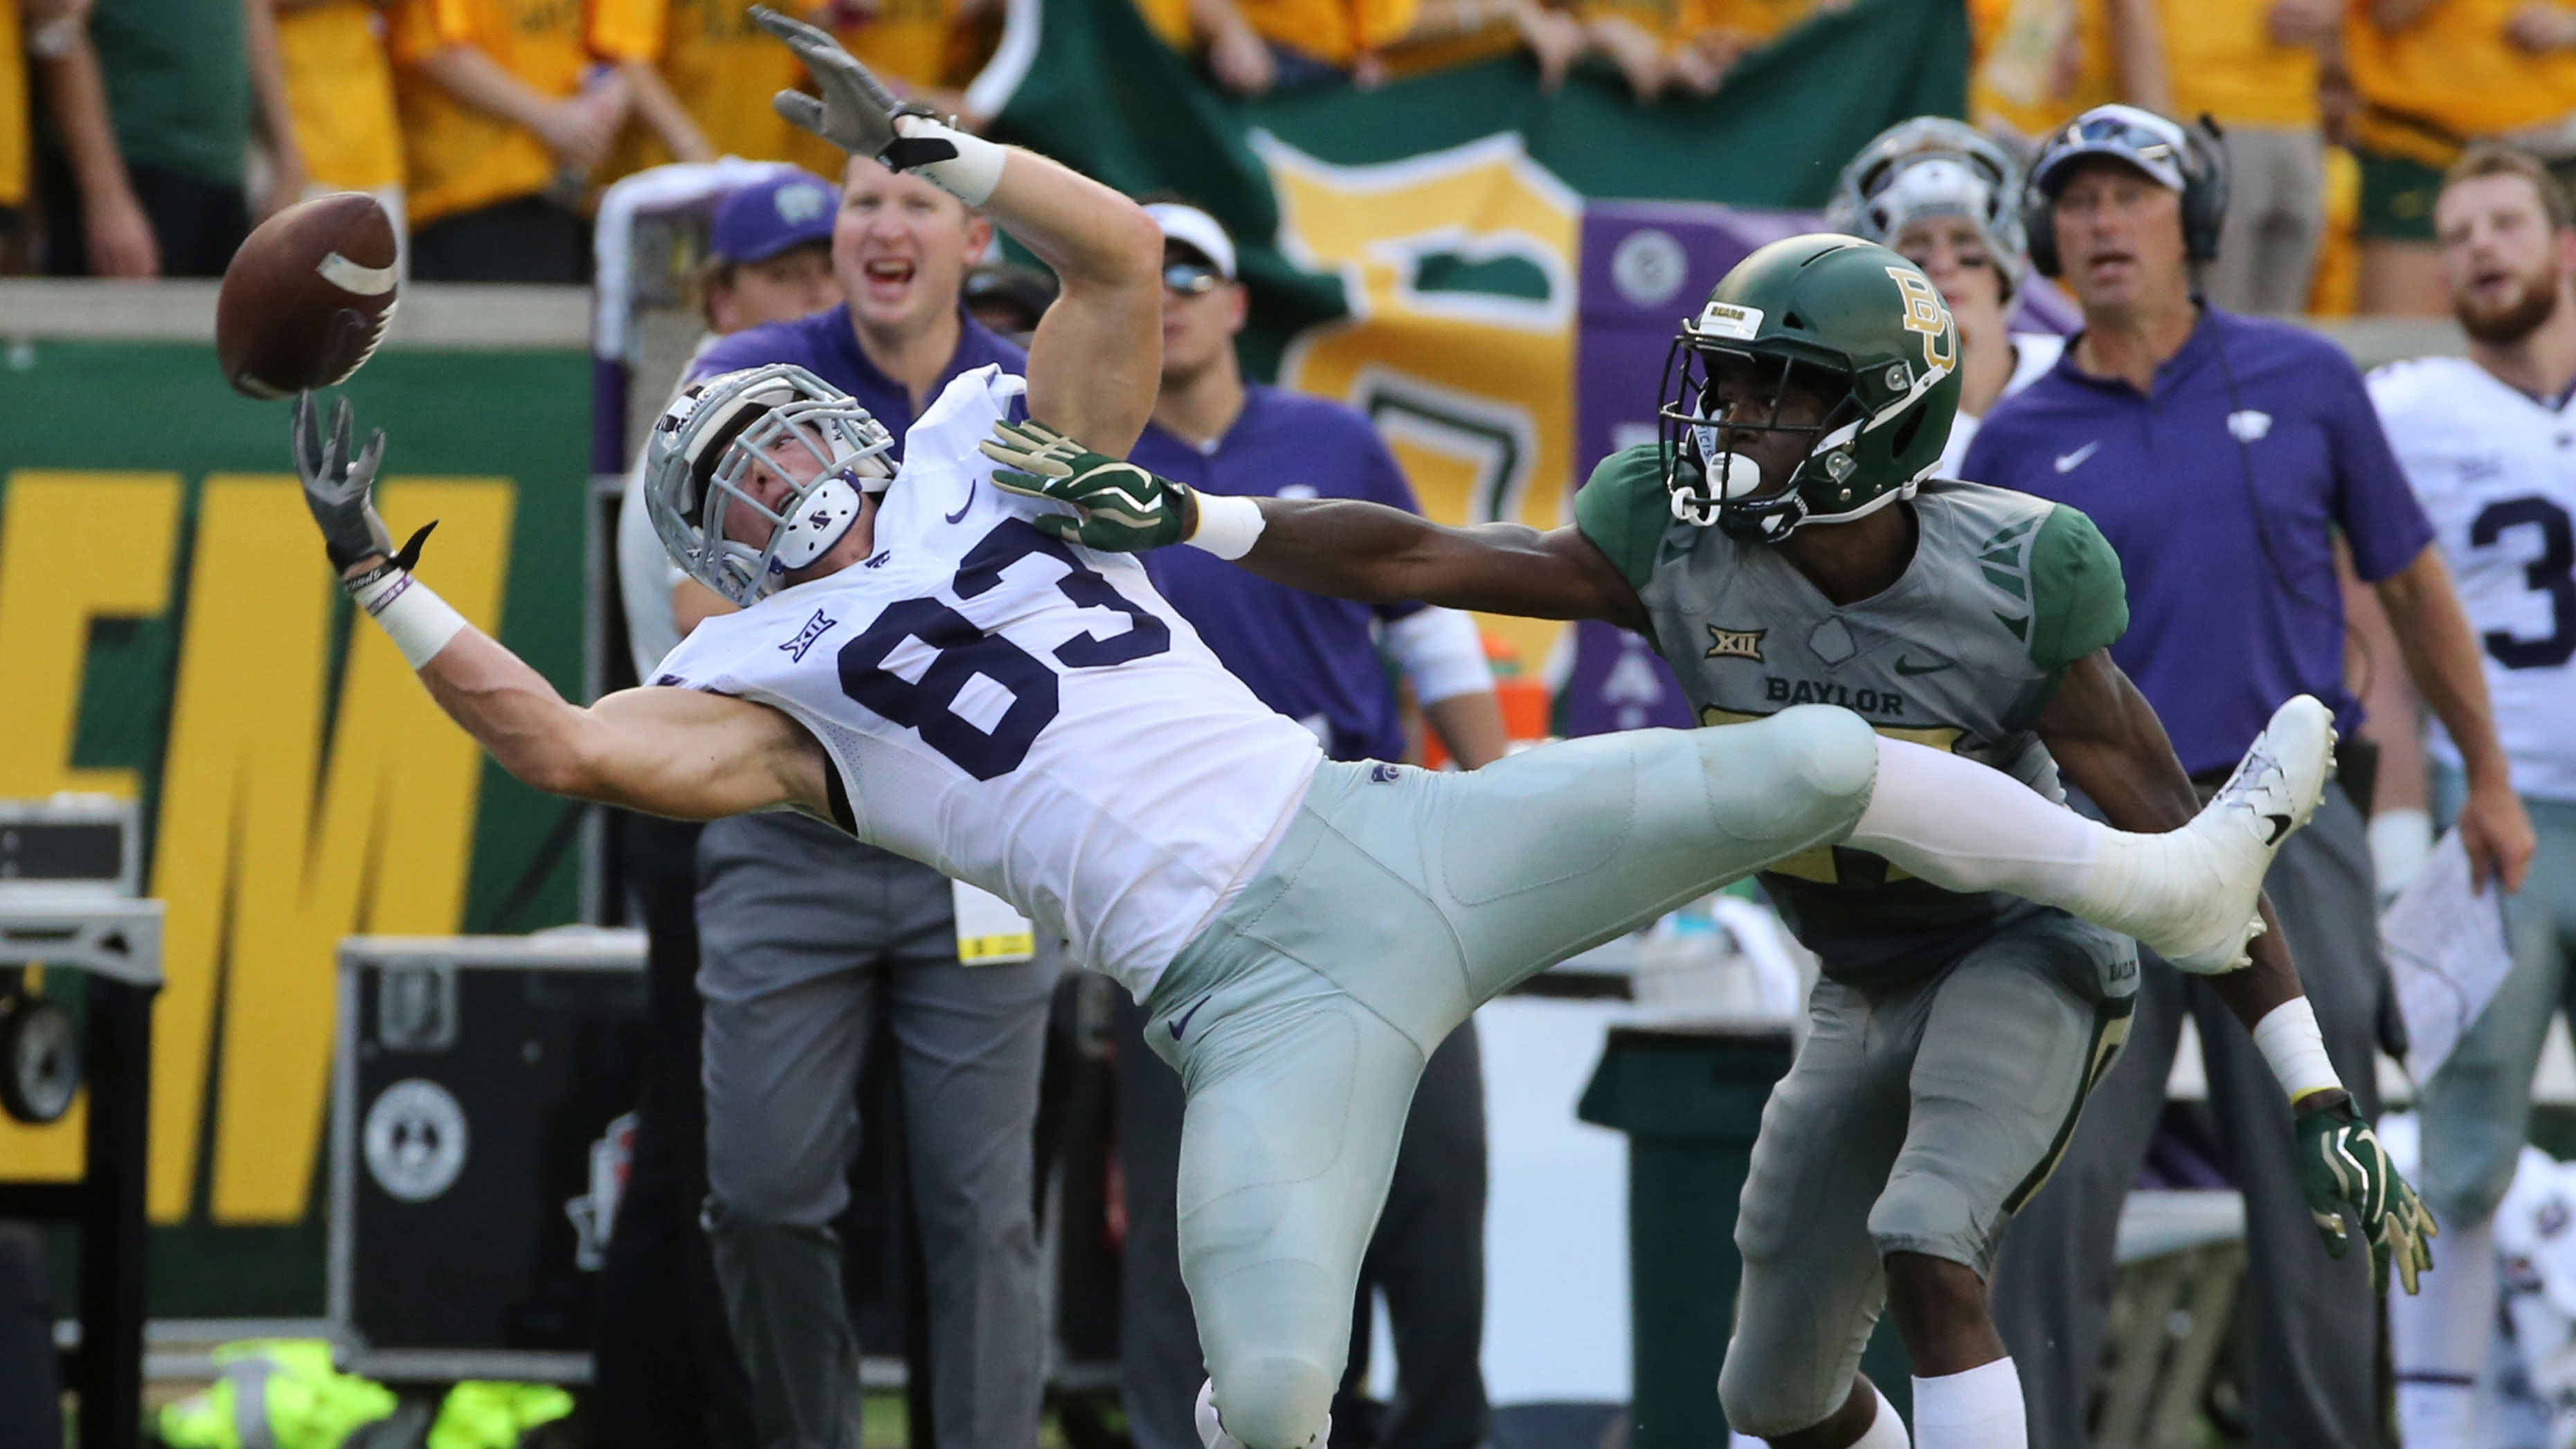 Late Baylor field goal buries K-State in 37-34 loss